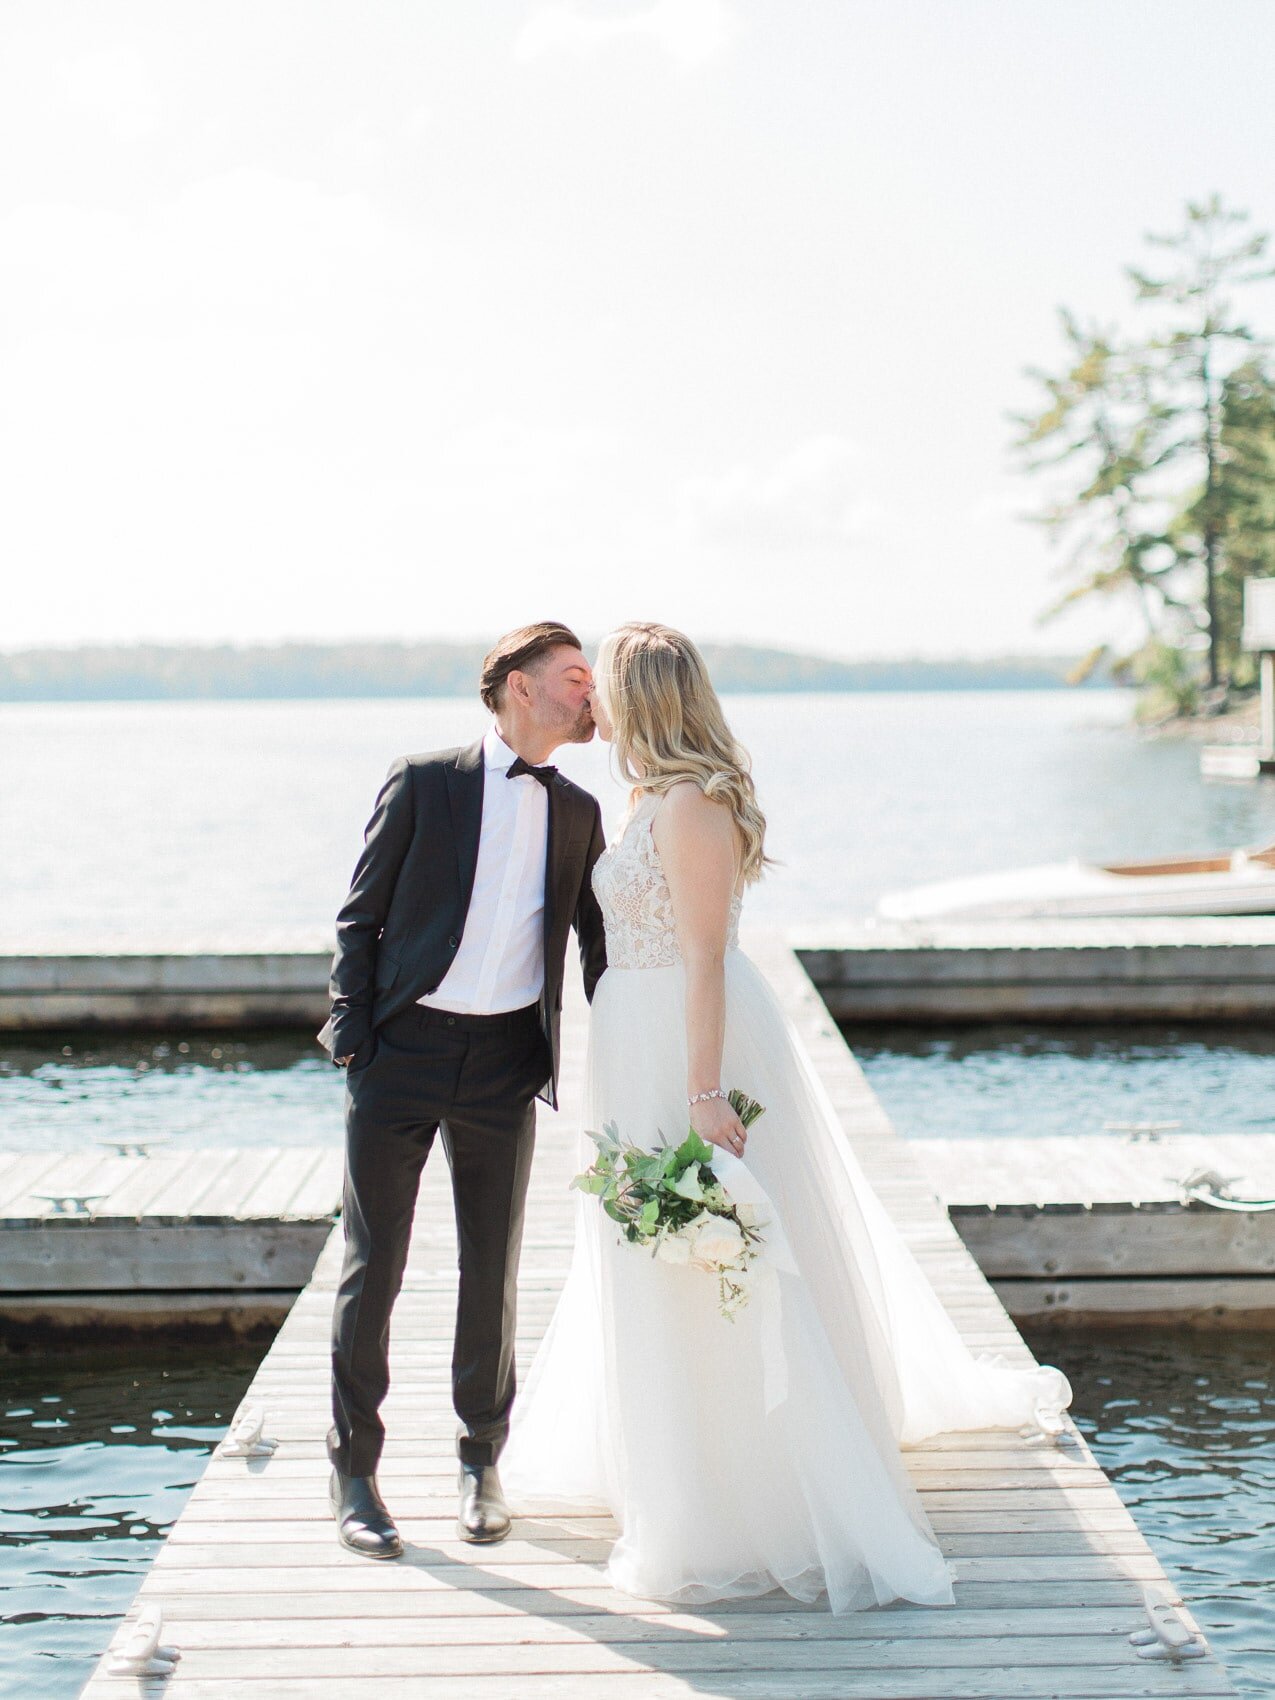 bride and groom posing naturally for a candid happy photo on their wedding day at windermere house muskoka